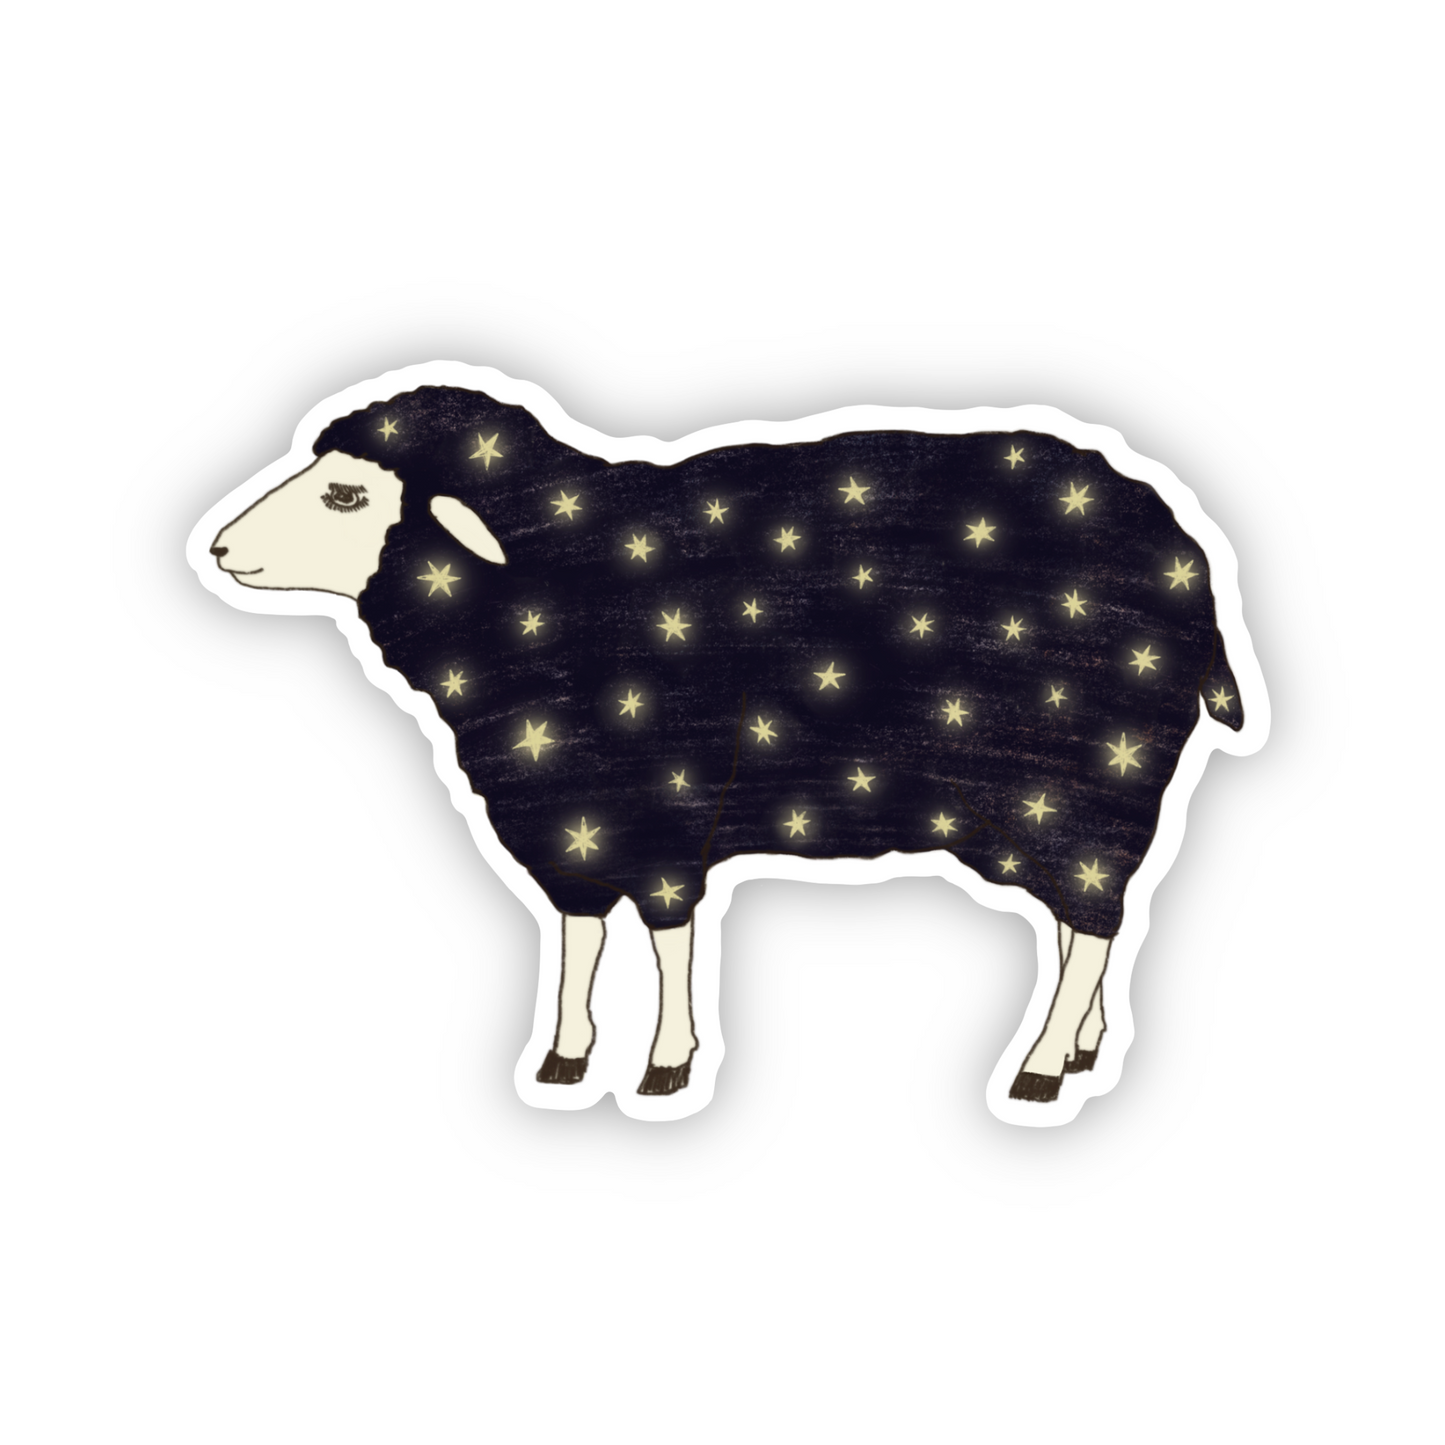 Watercolour sticker with the dreamy illustration of a sheep with starry sky on its body